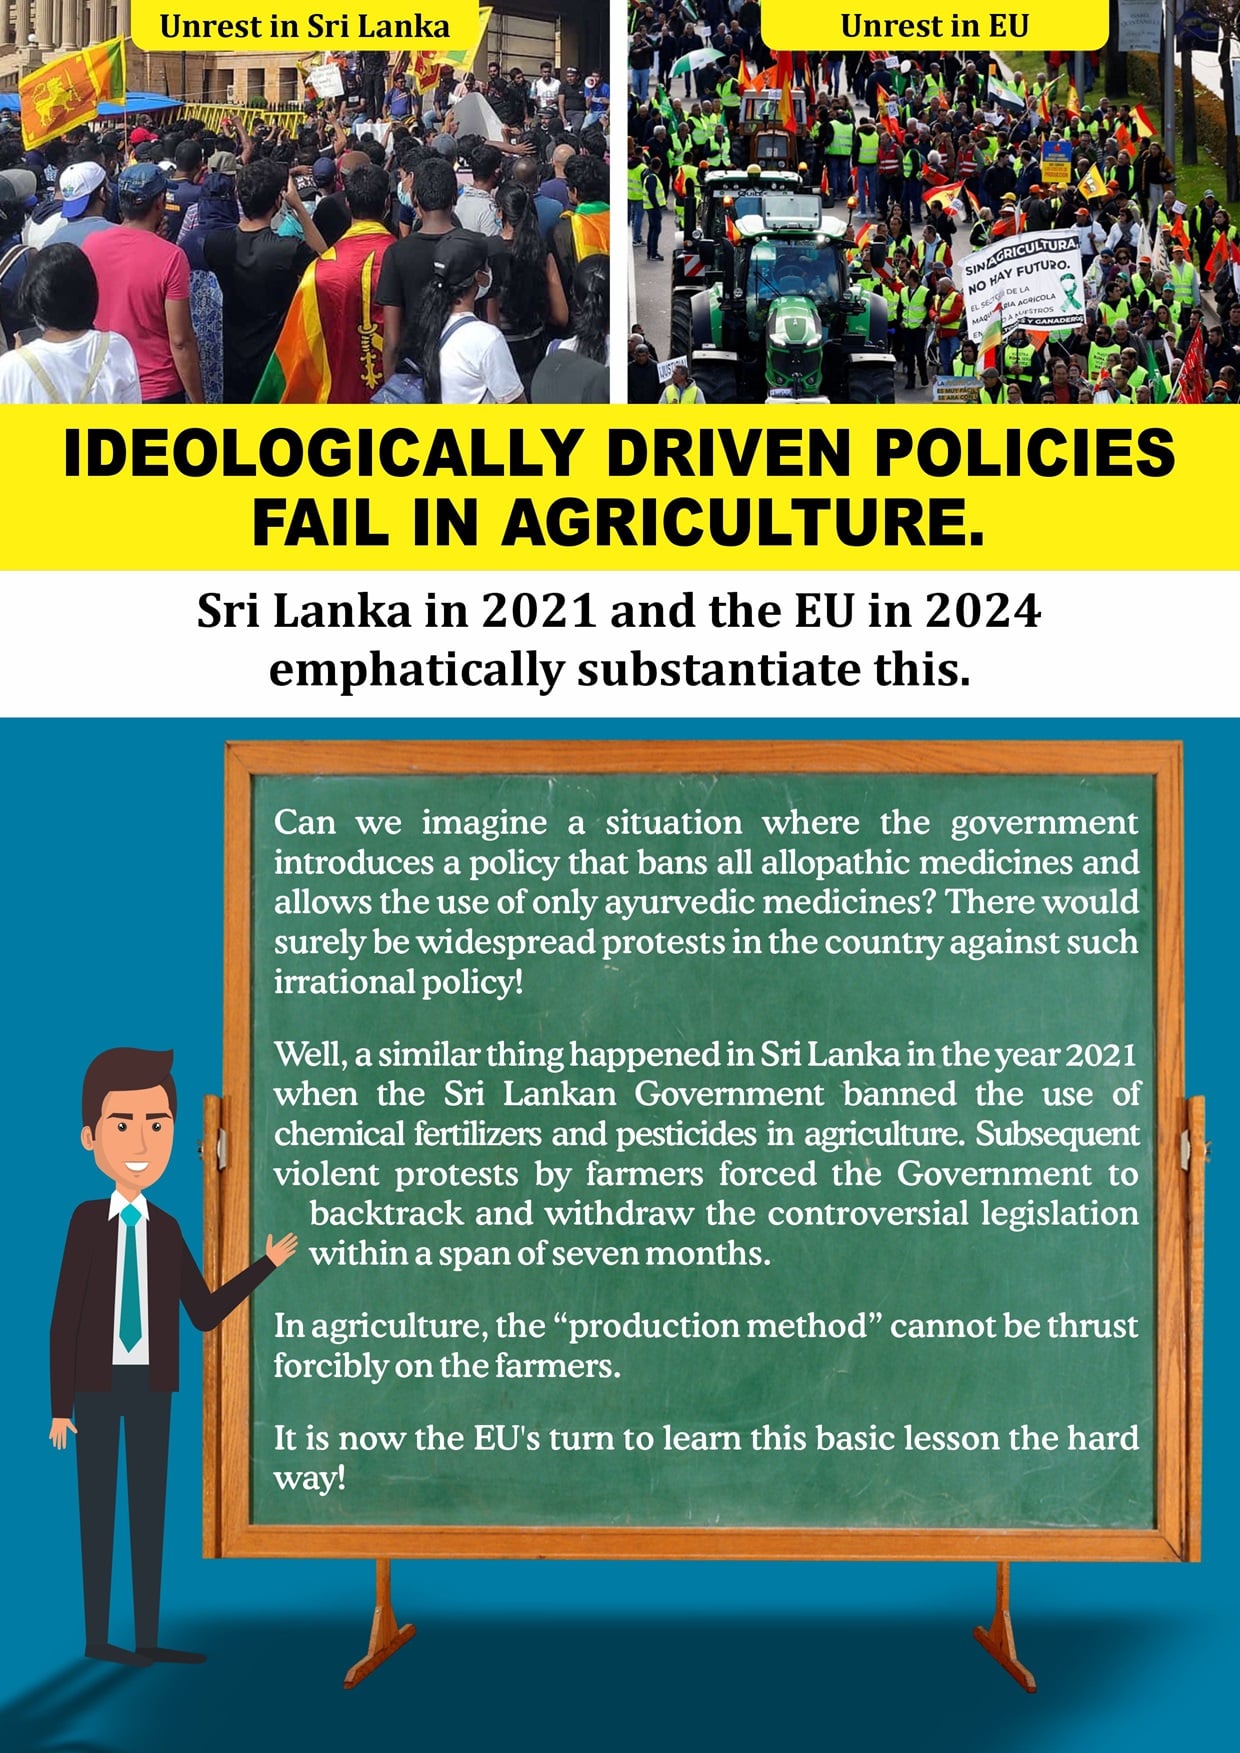 Ideologically driven policies fail in agriculture - part 1